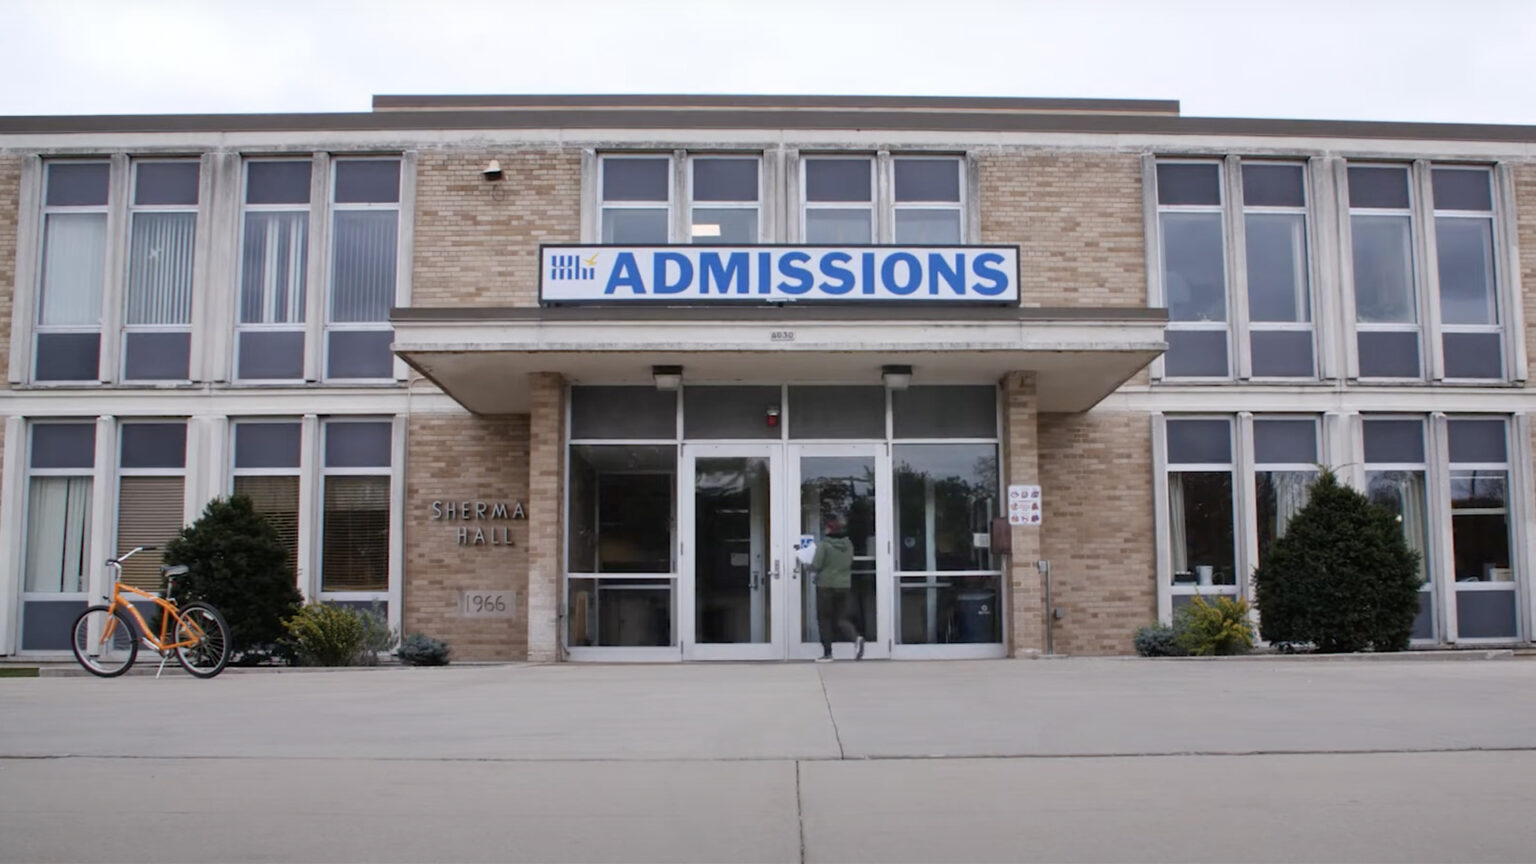 A sign reading Admissions sits atop the awning to an entrance of a two-story brick building with tall glass-and-metal panel windows, with a person walking toward the doors and a bicycle parked in front of bushes to the side.